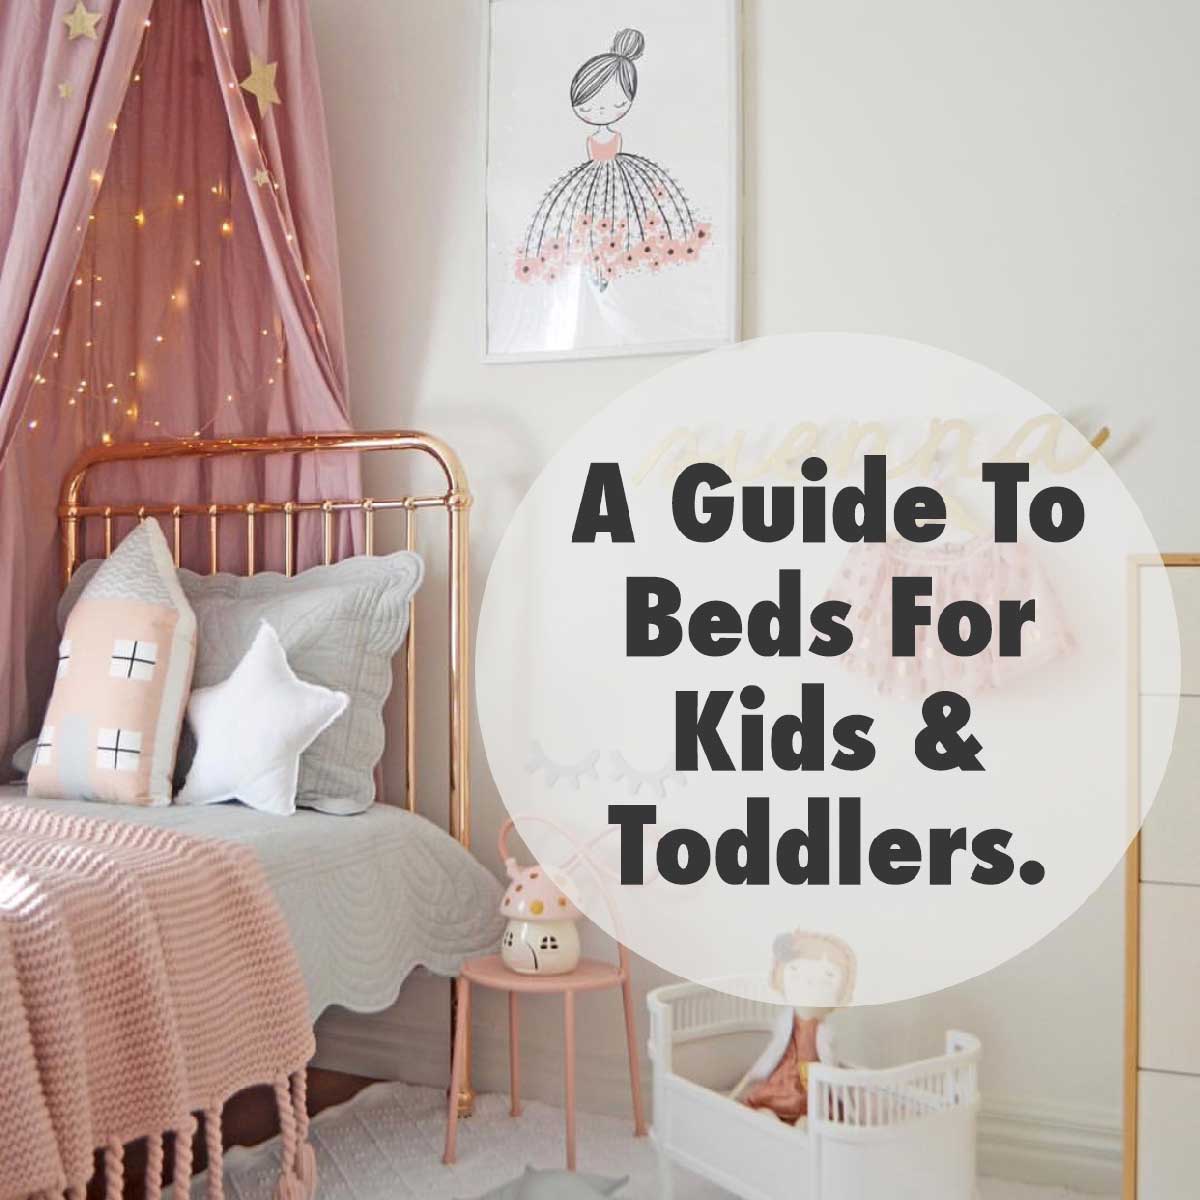 A Guide To Beds For Kids & Toddlers.